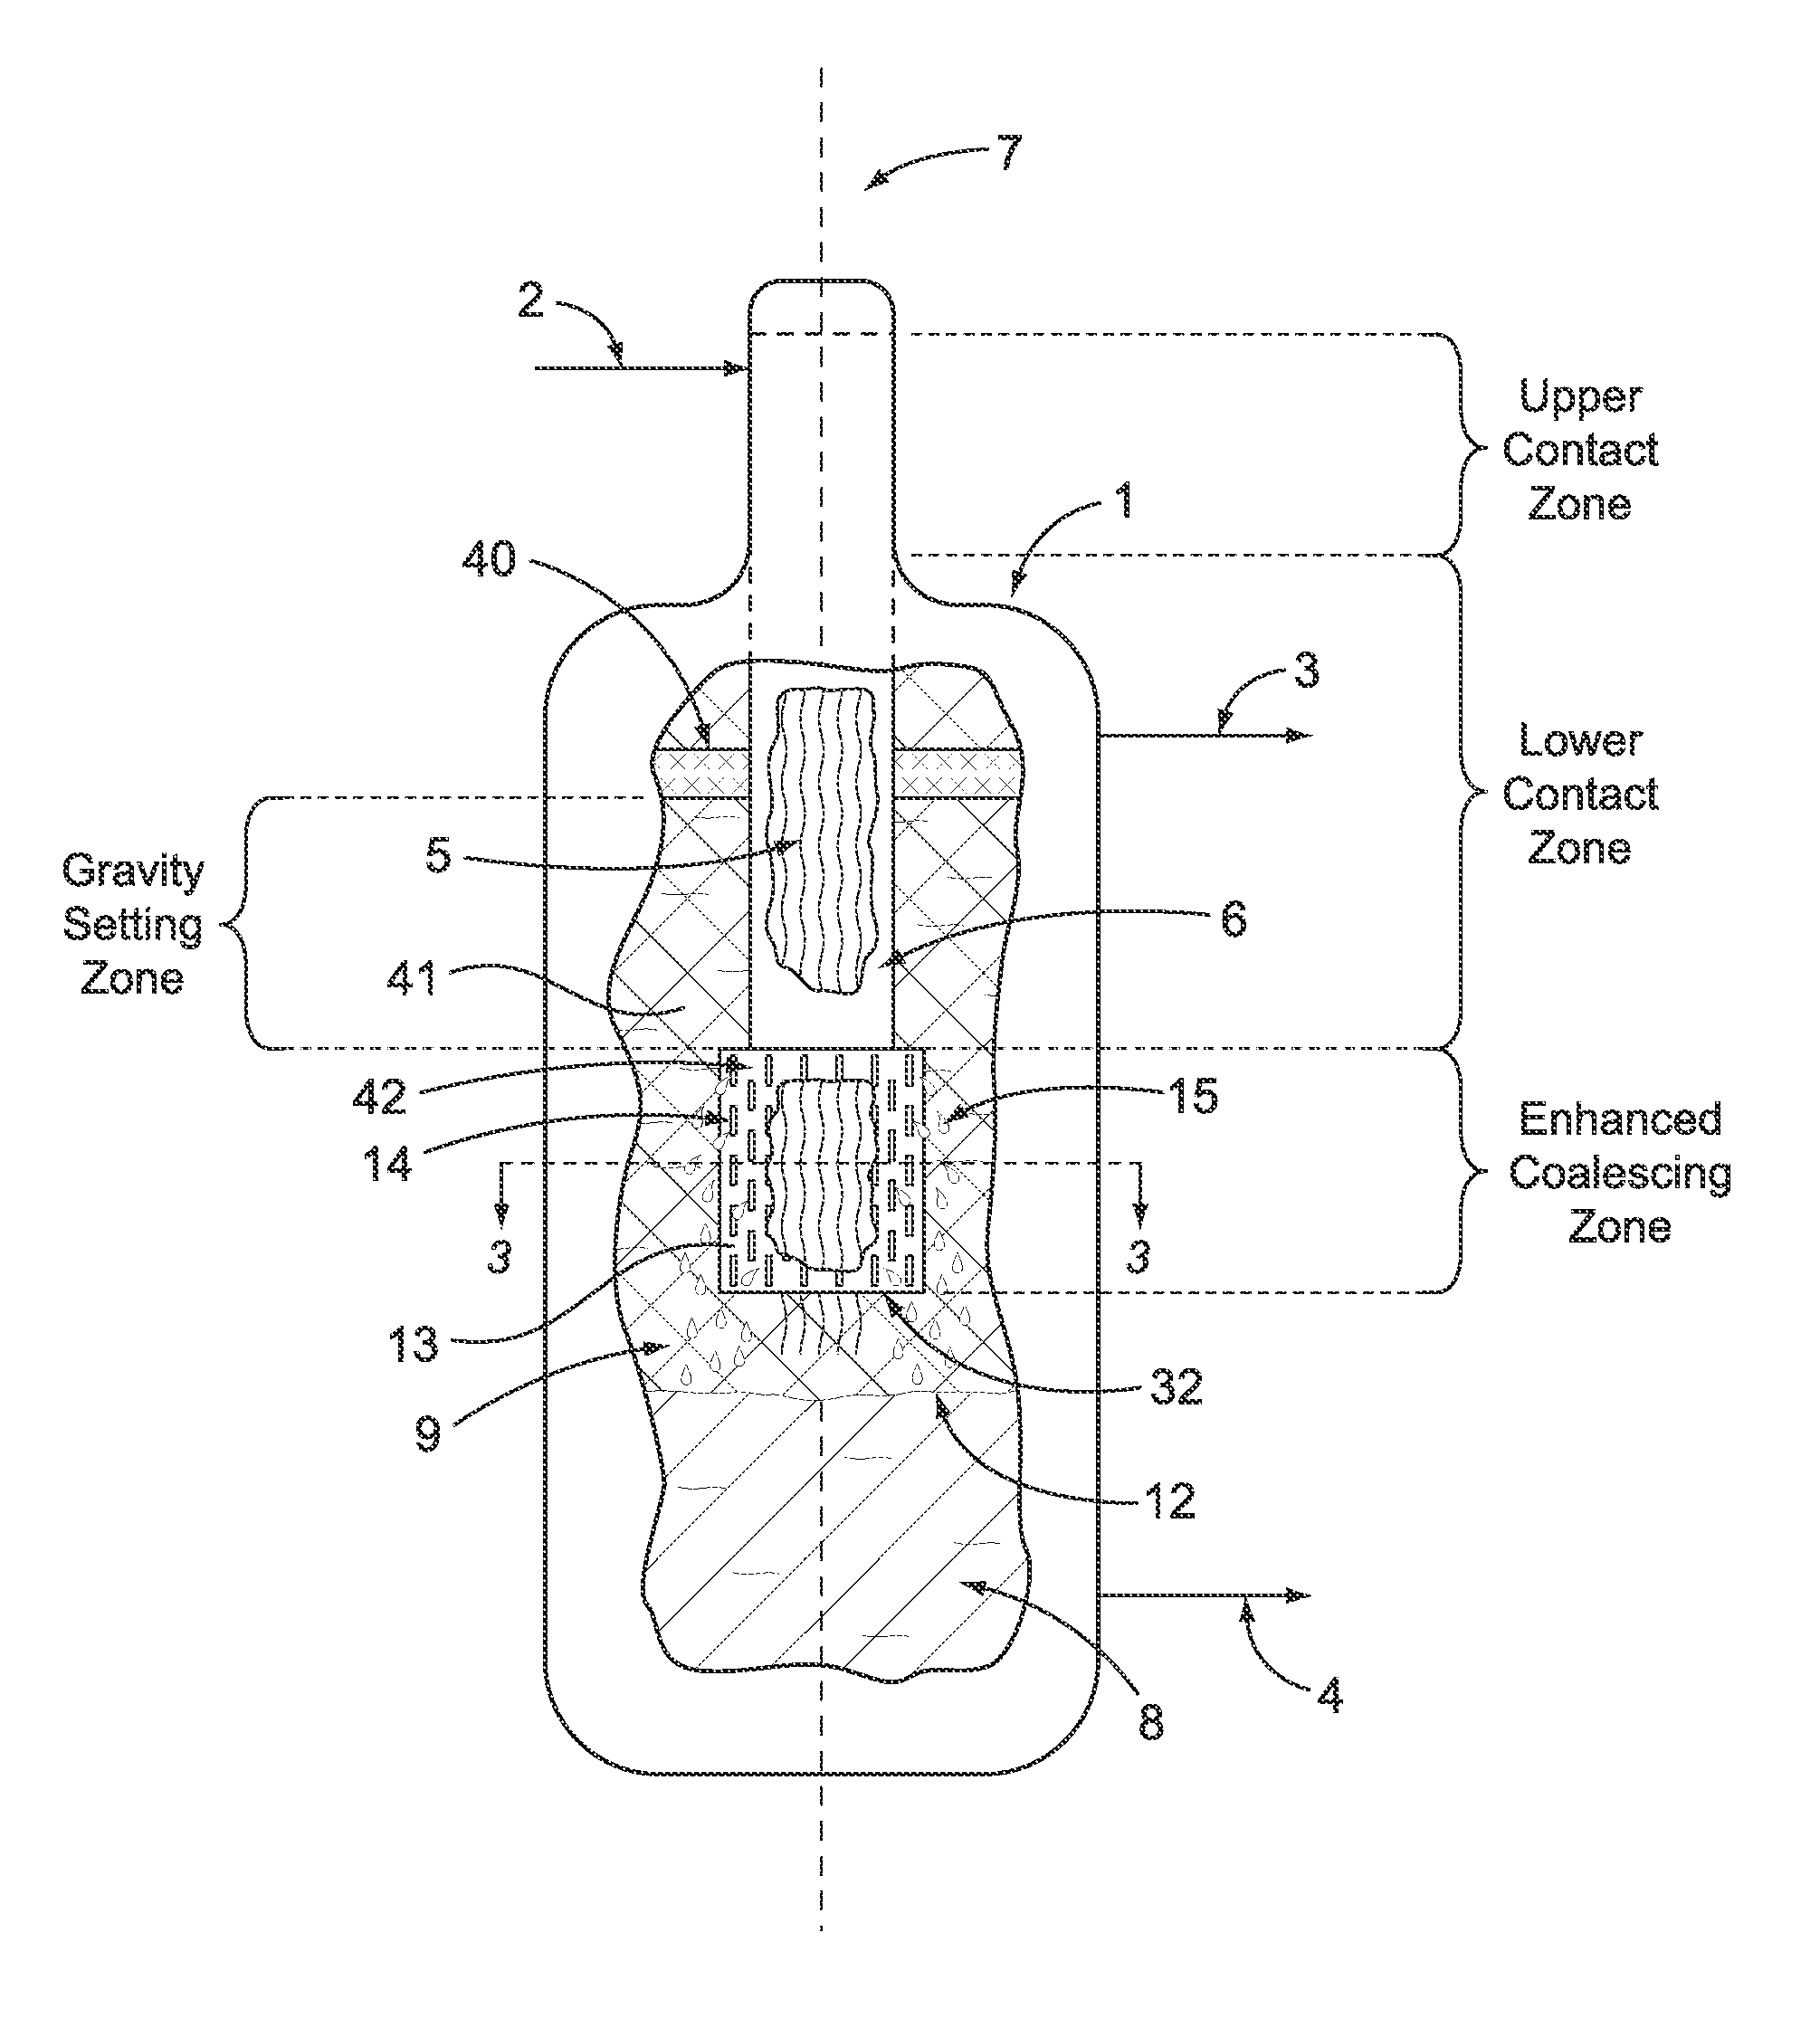 Contactor and Separation Apparatus and Process of Using Same